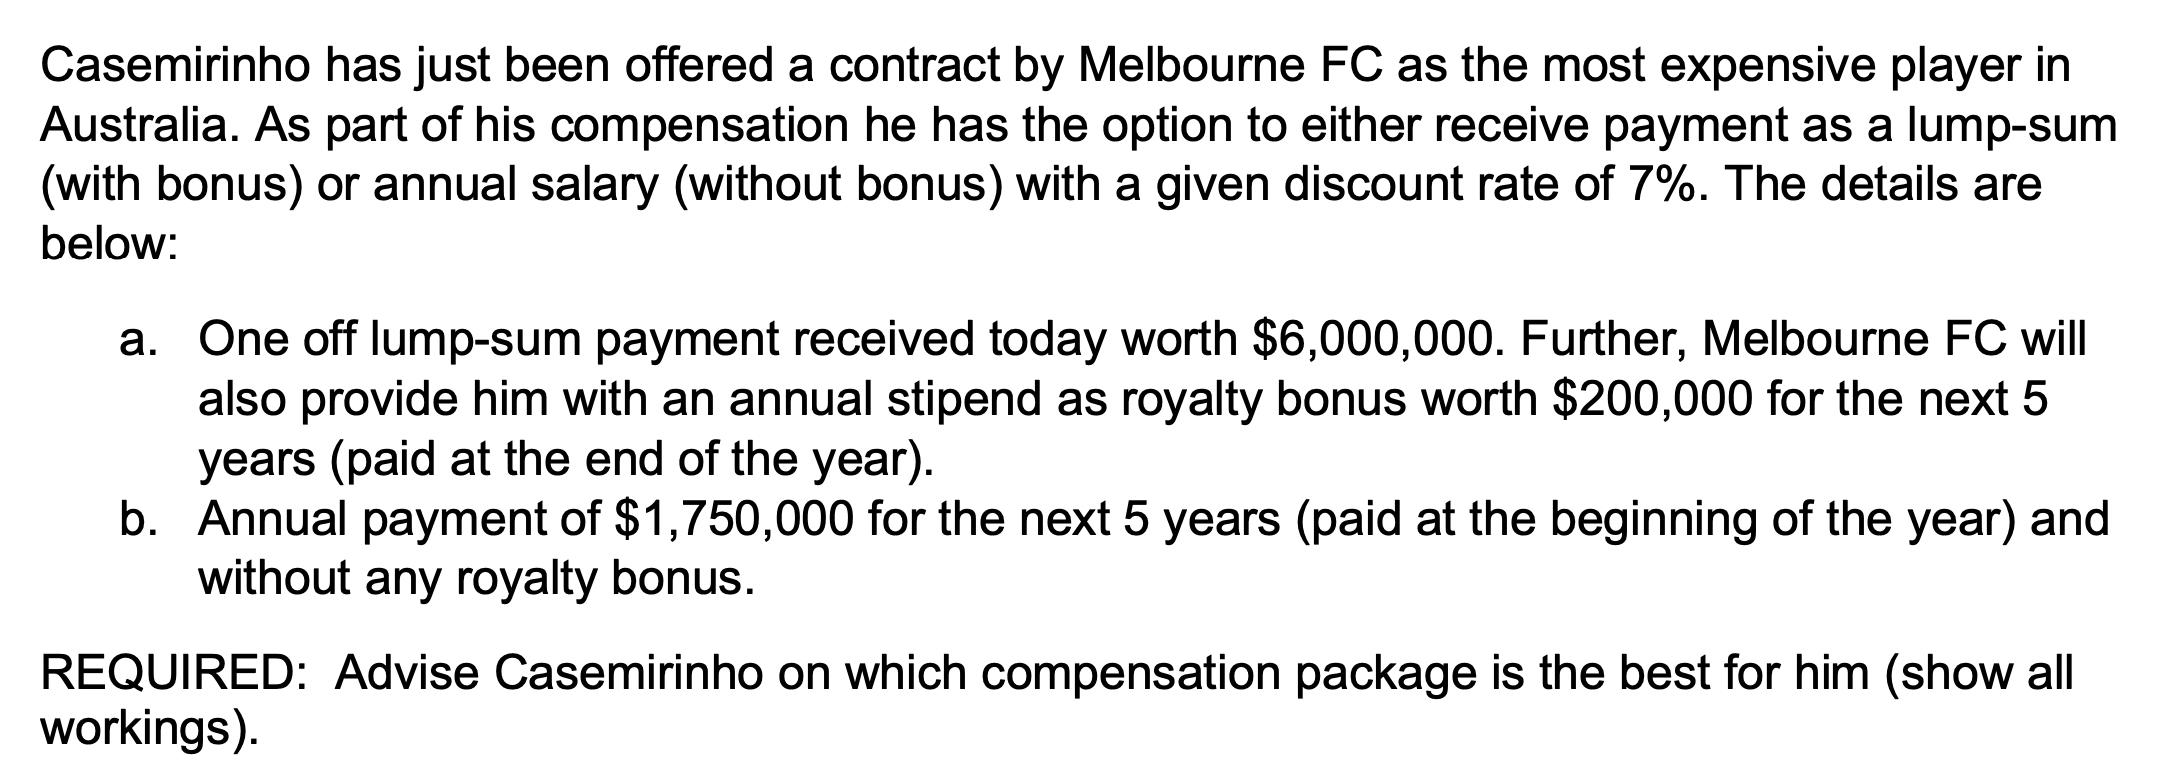 Casemirinho has just been offered a contract by Melbourne FC as the most expensive player in Australia. As part of his compen